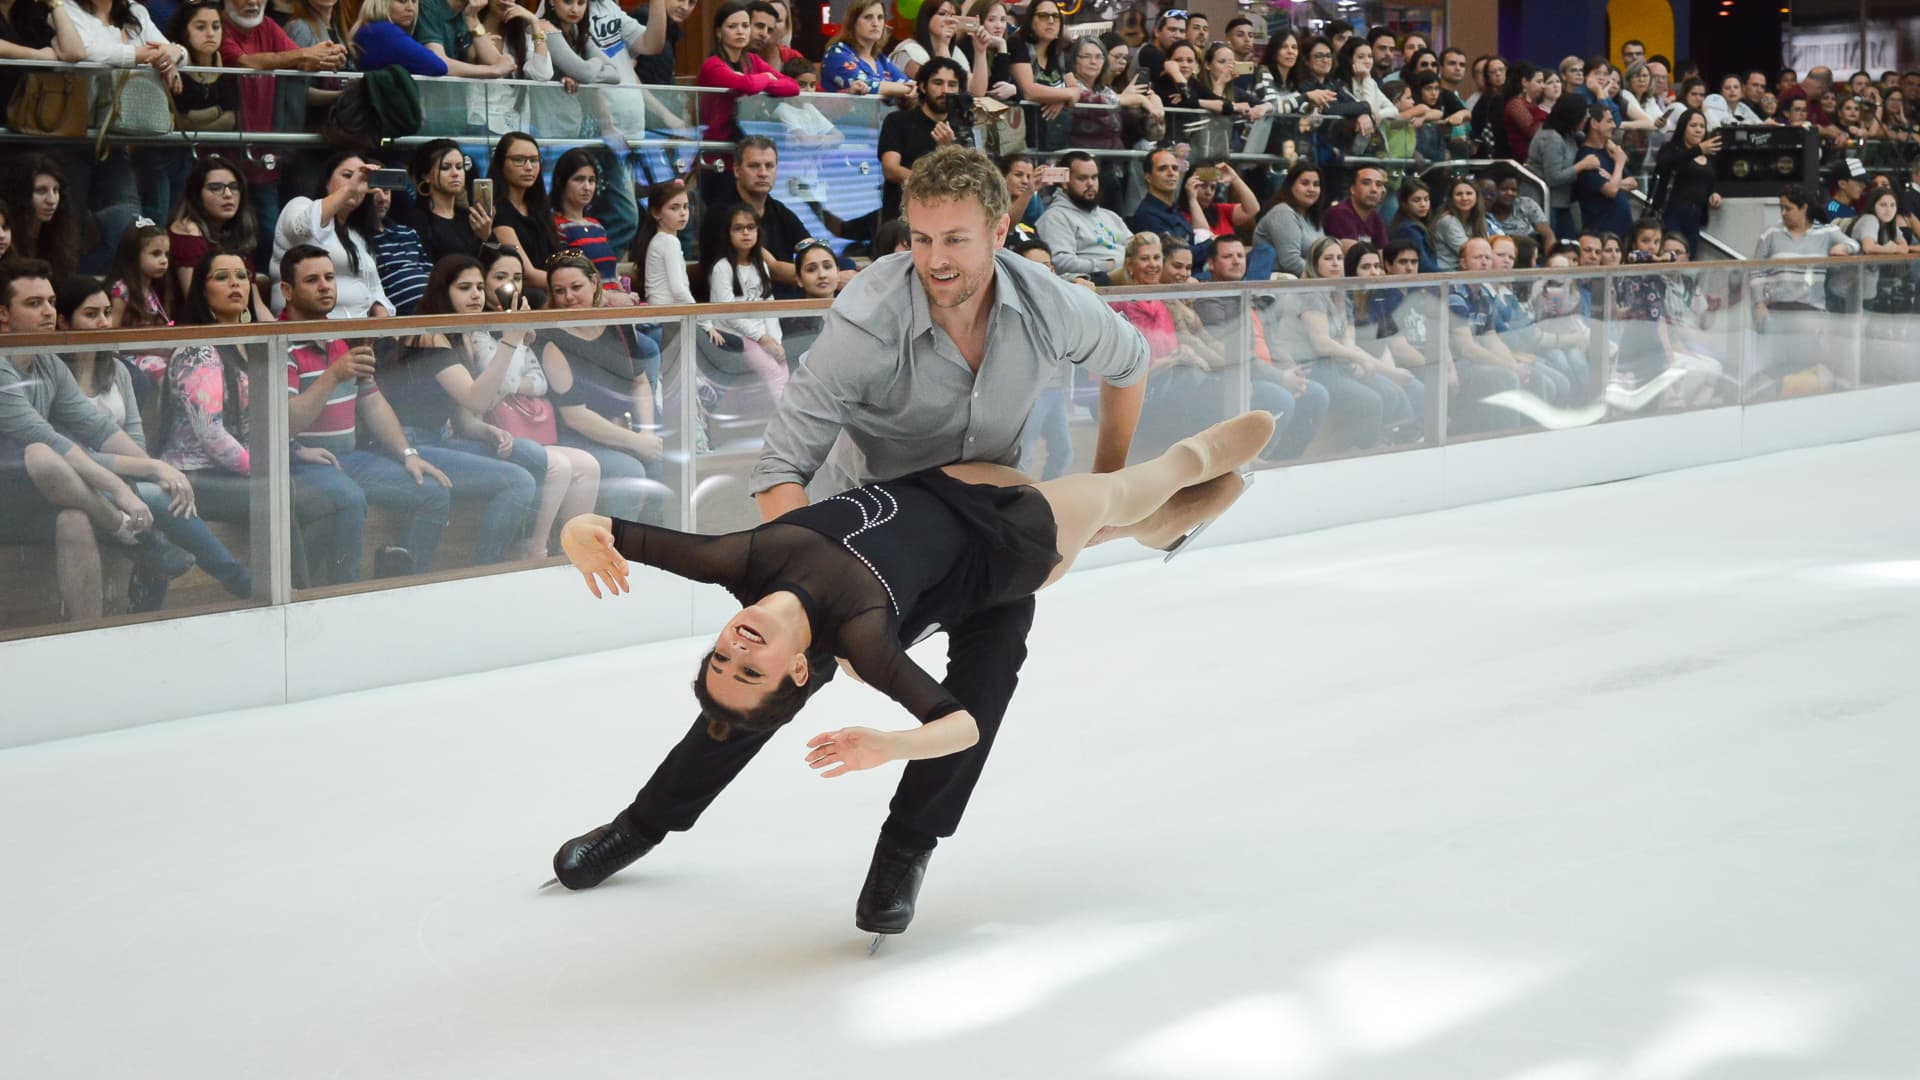 Krause and Alvin perform at an ice show in Brazil in 2018. They skated with Disney on Ice for six and 11 years, respectively, and visited every continent but Antartica.